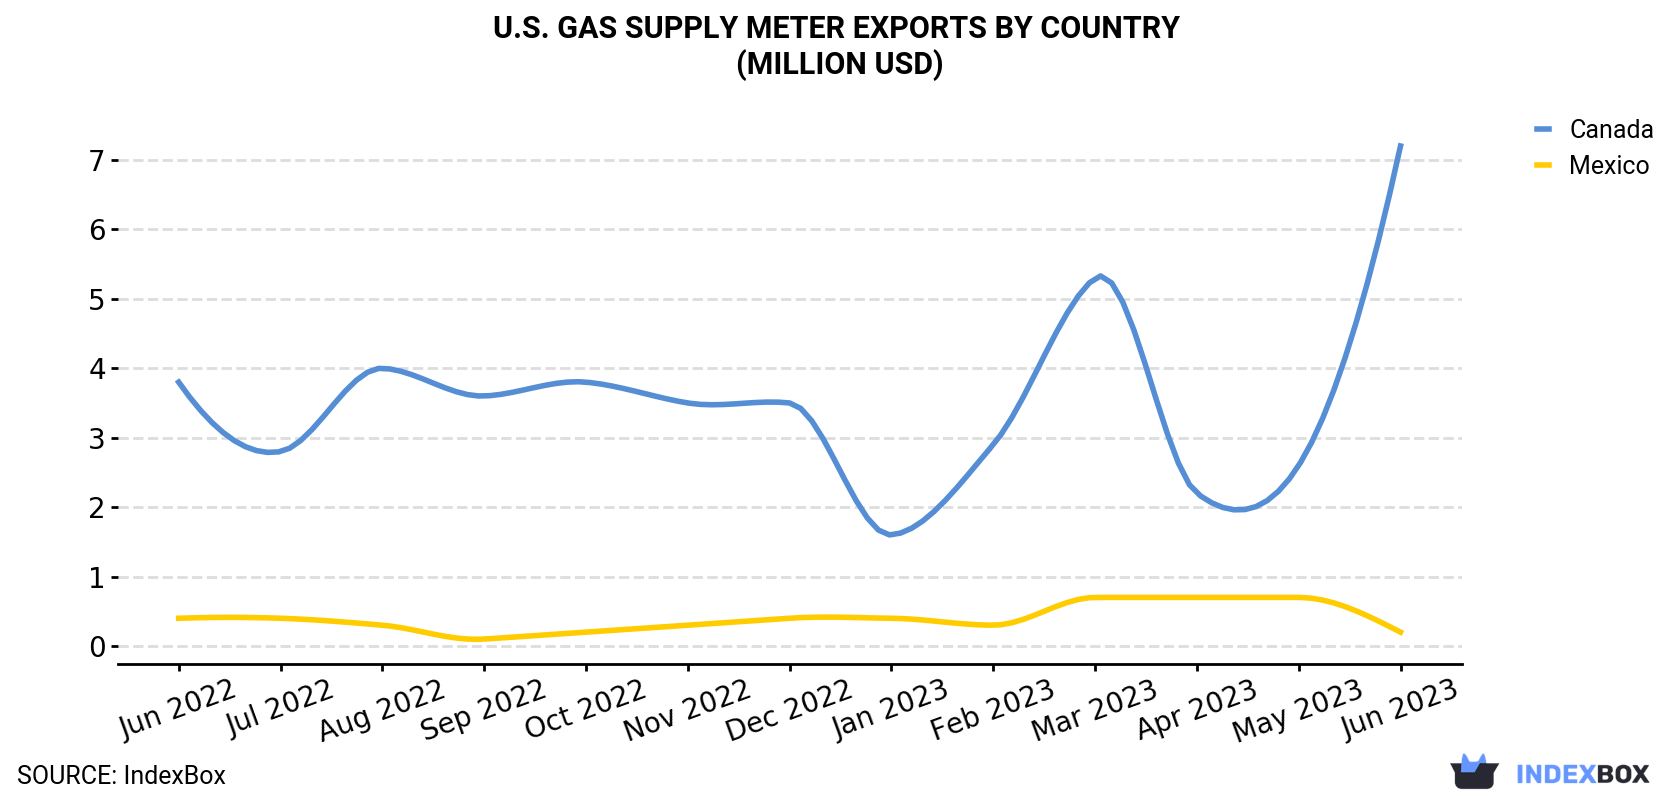 U.S. Gas Supply Meter Exports By Country (Million USD)